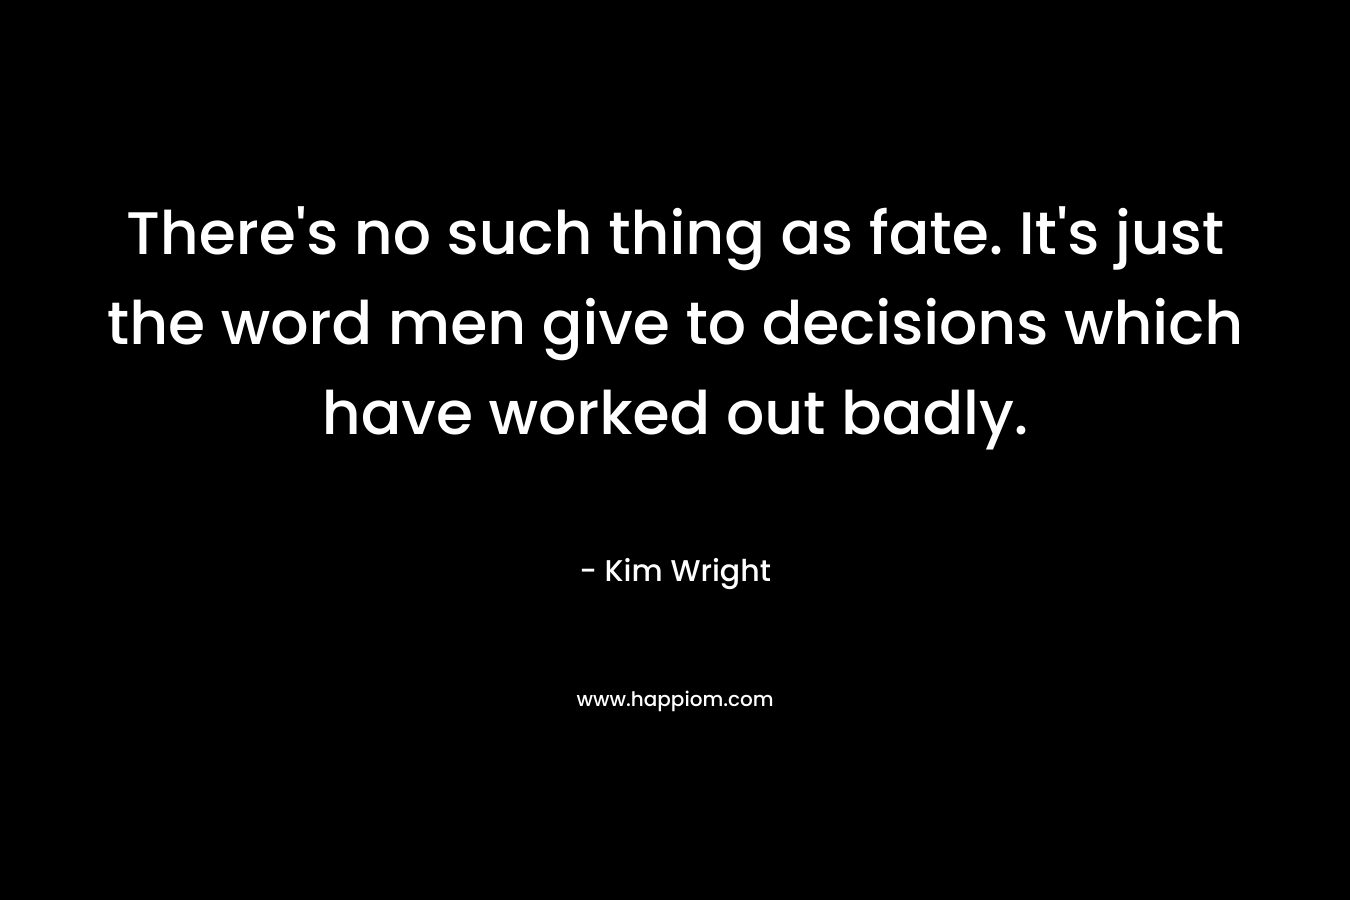 There's no such thing as fate. It's just the word men give to decisions which have worked out badly.